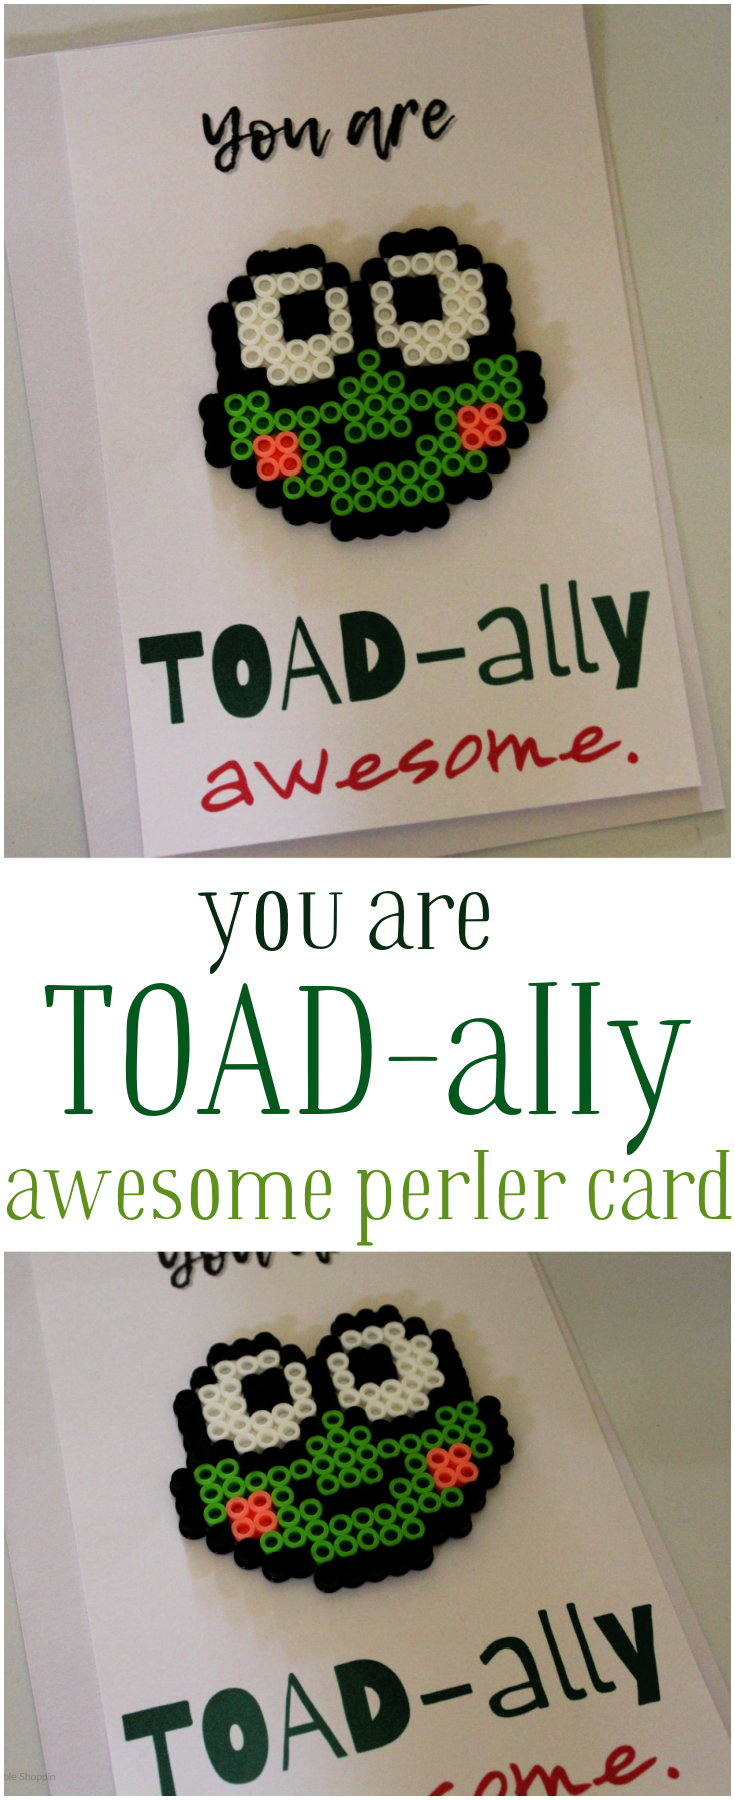 TOAD-ally awesome